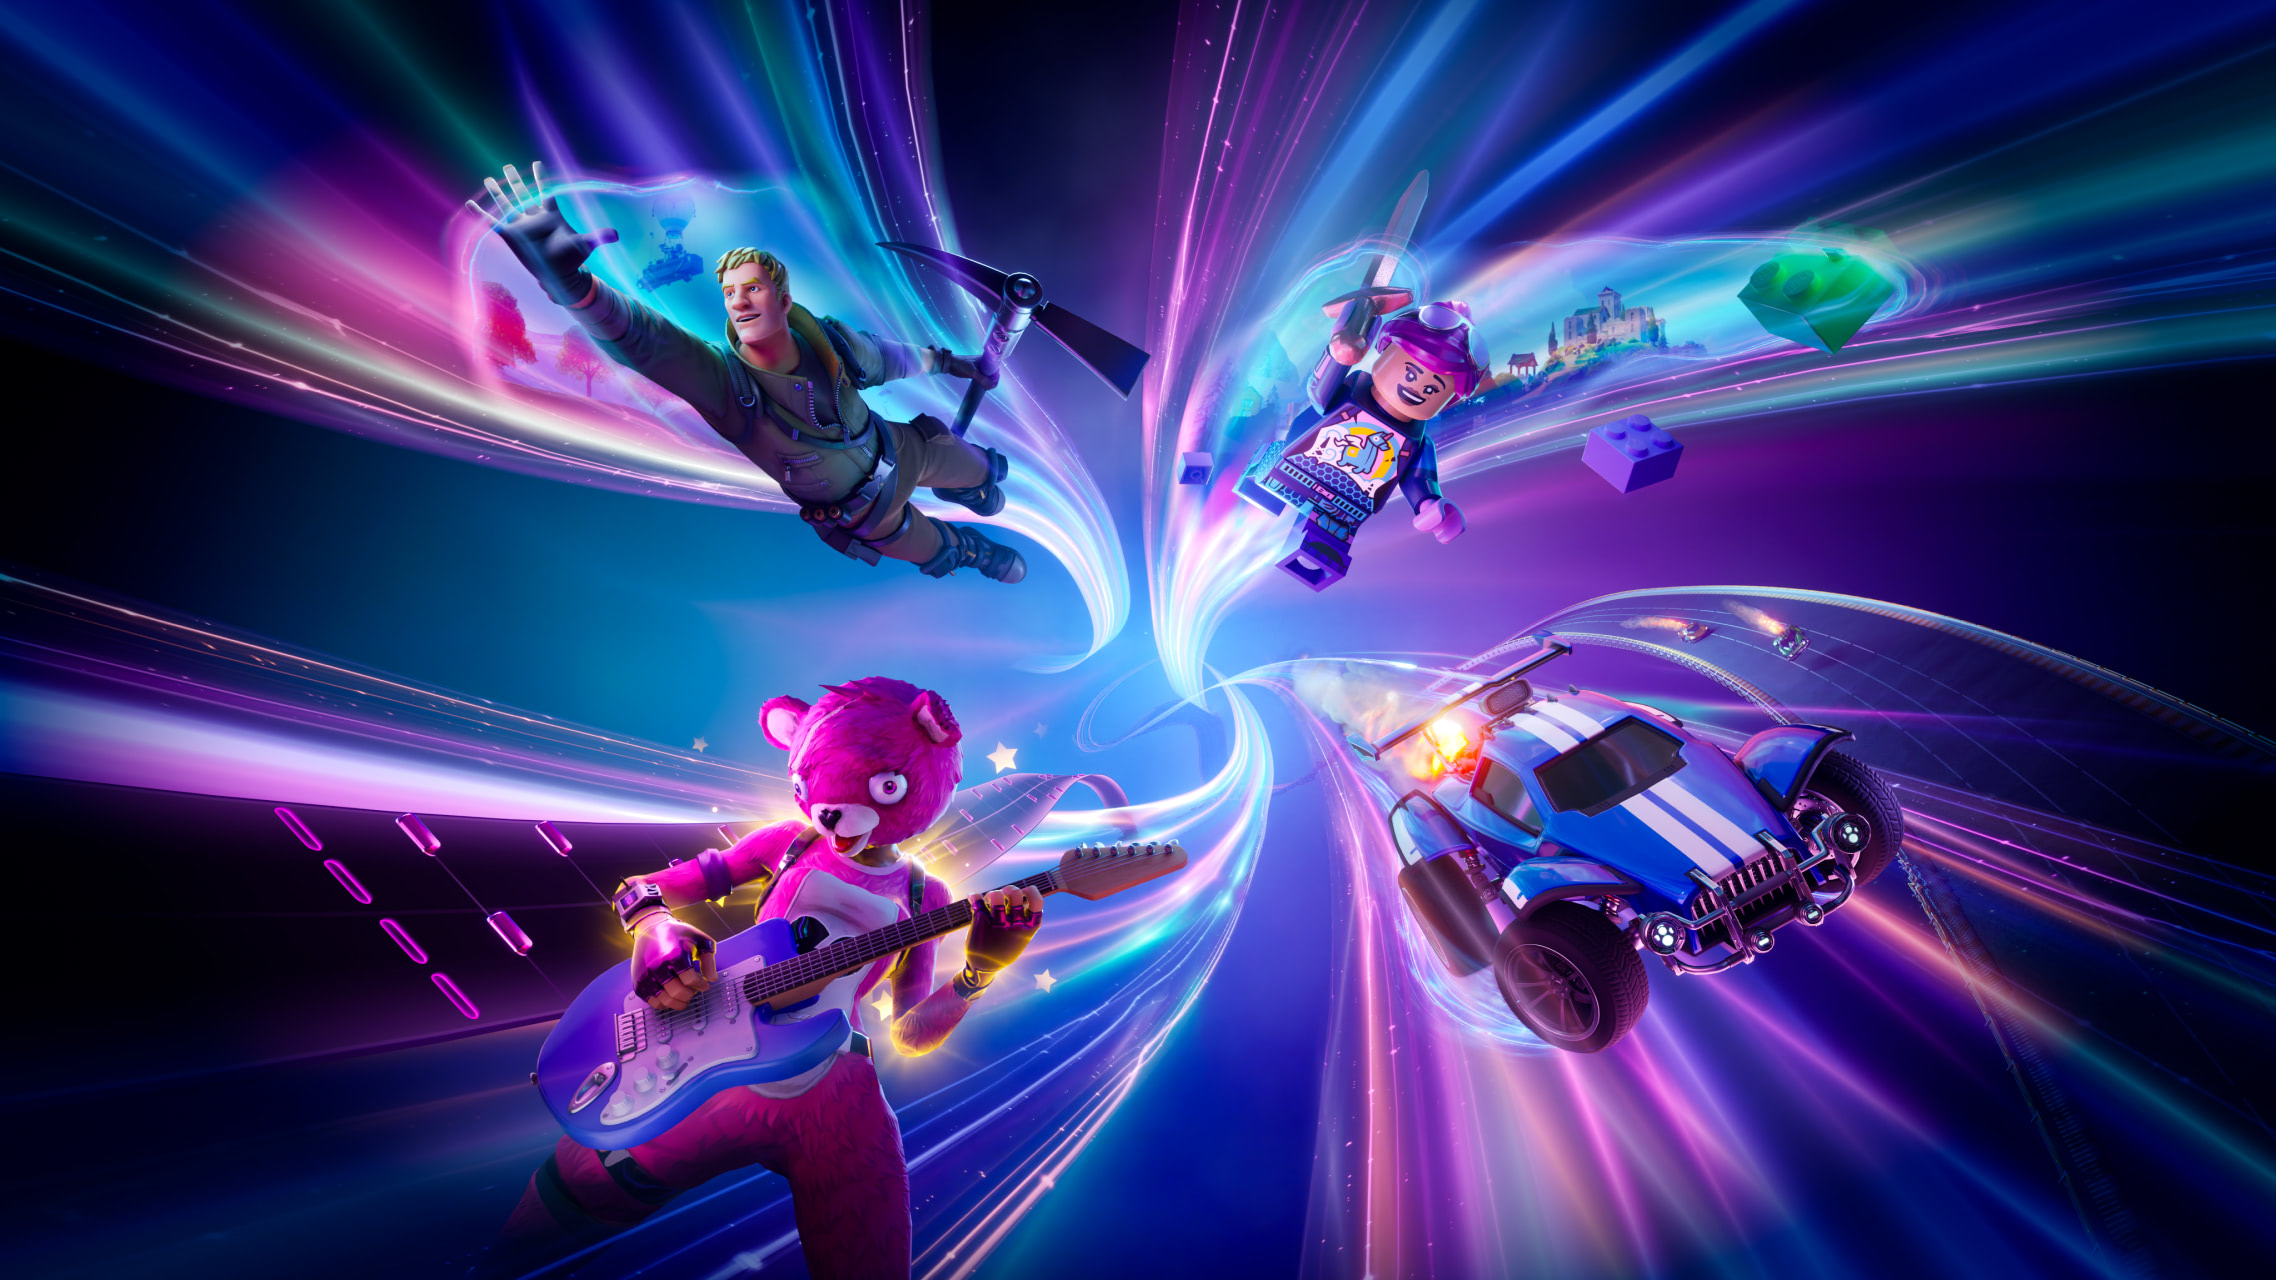 Fortnite Dominates Gaming Landscape with Record-Breaking Player Hours